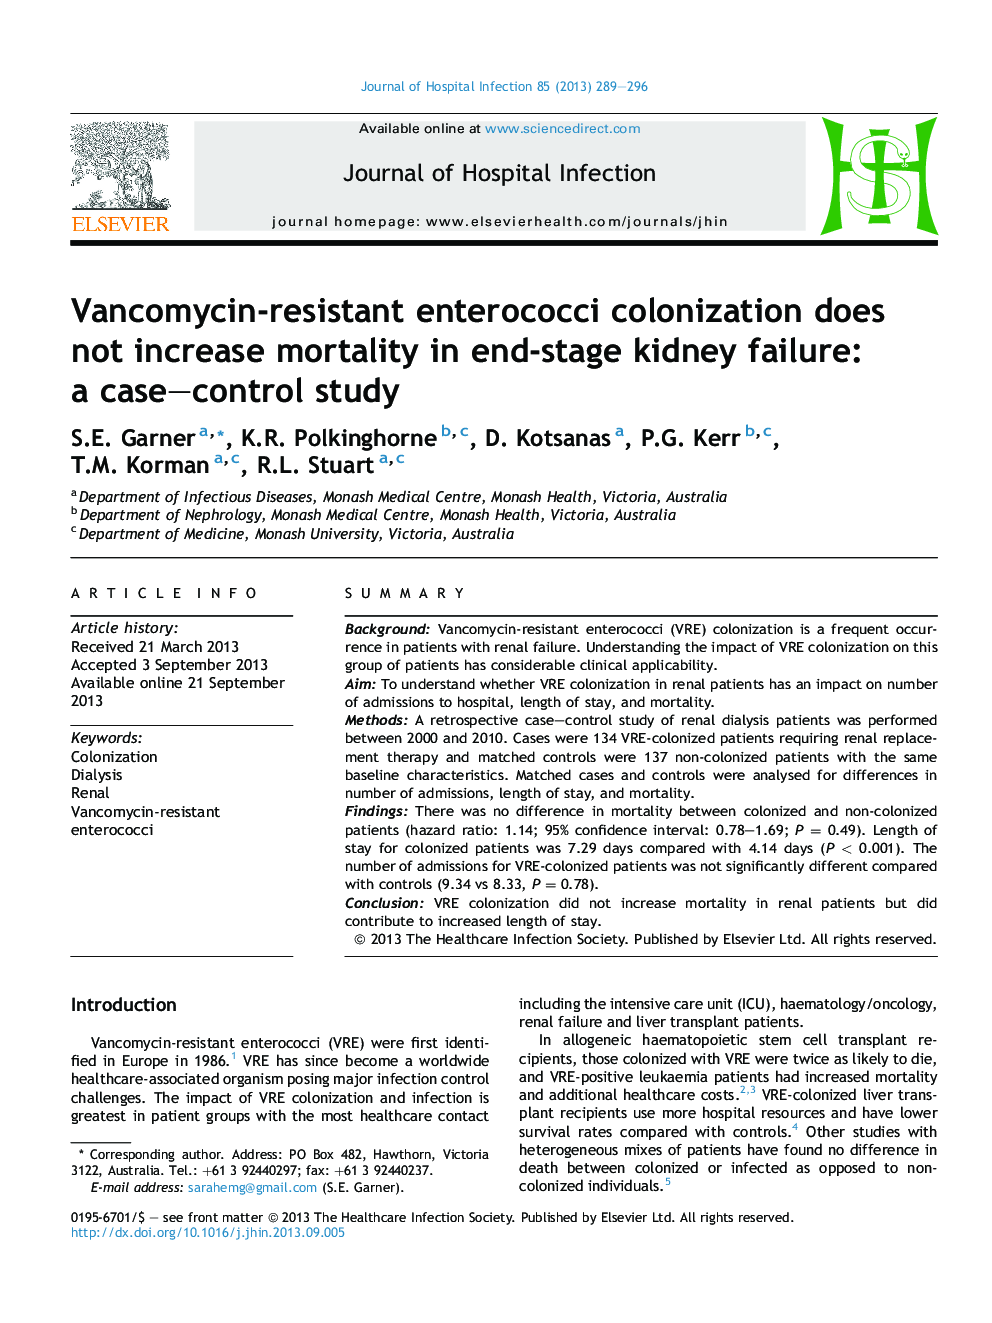 Vancomycin-resistant enterococci colonization does not increase mortality in end-stage kidney failure: a case–control study